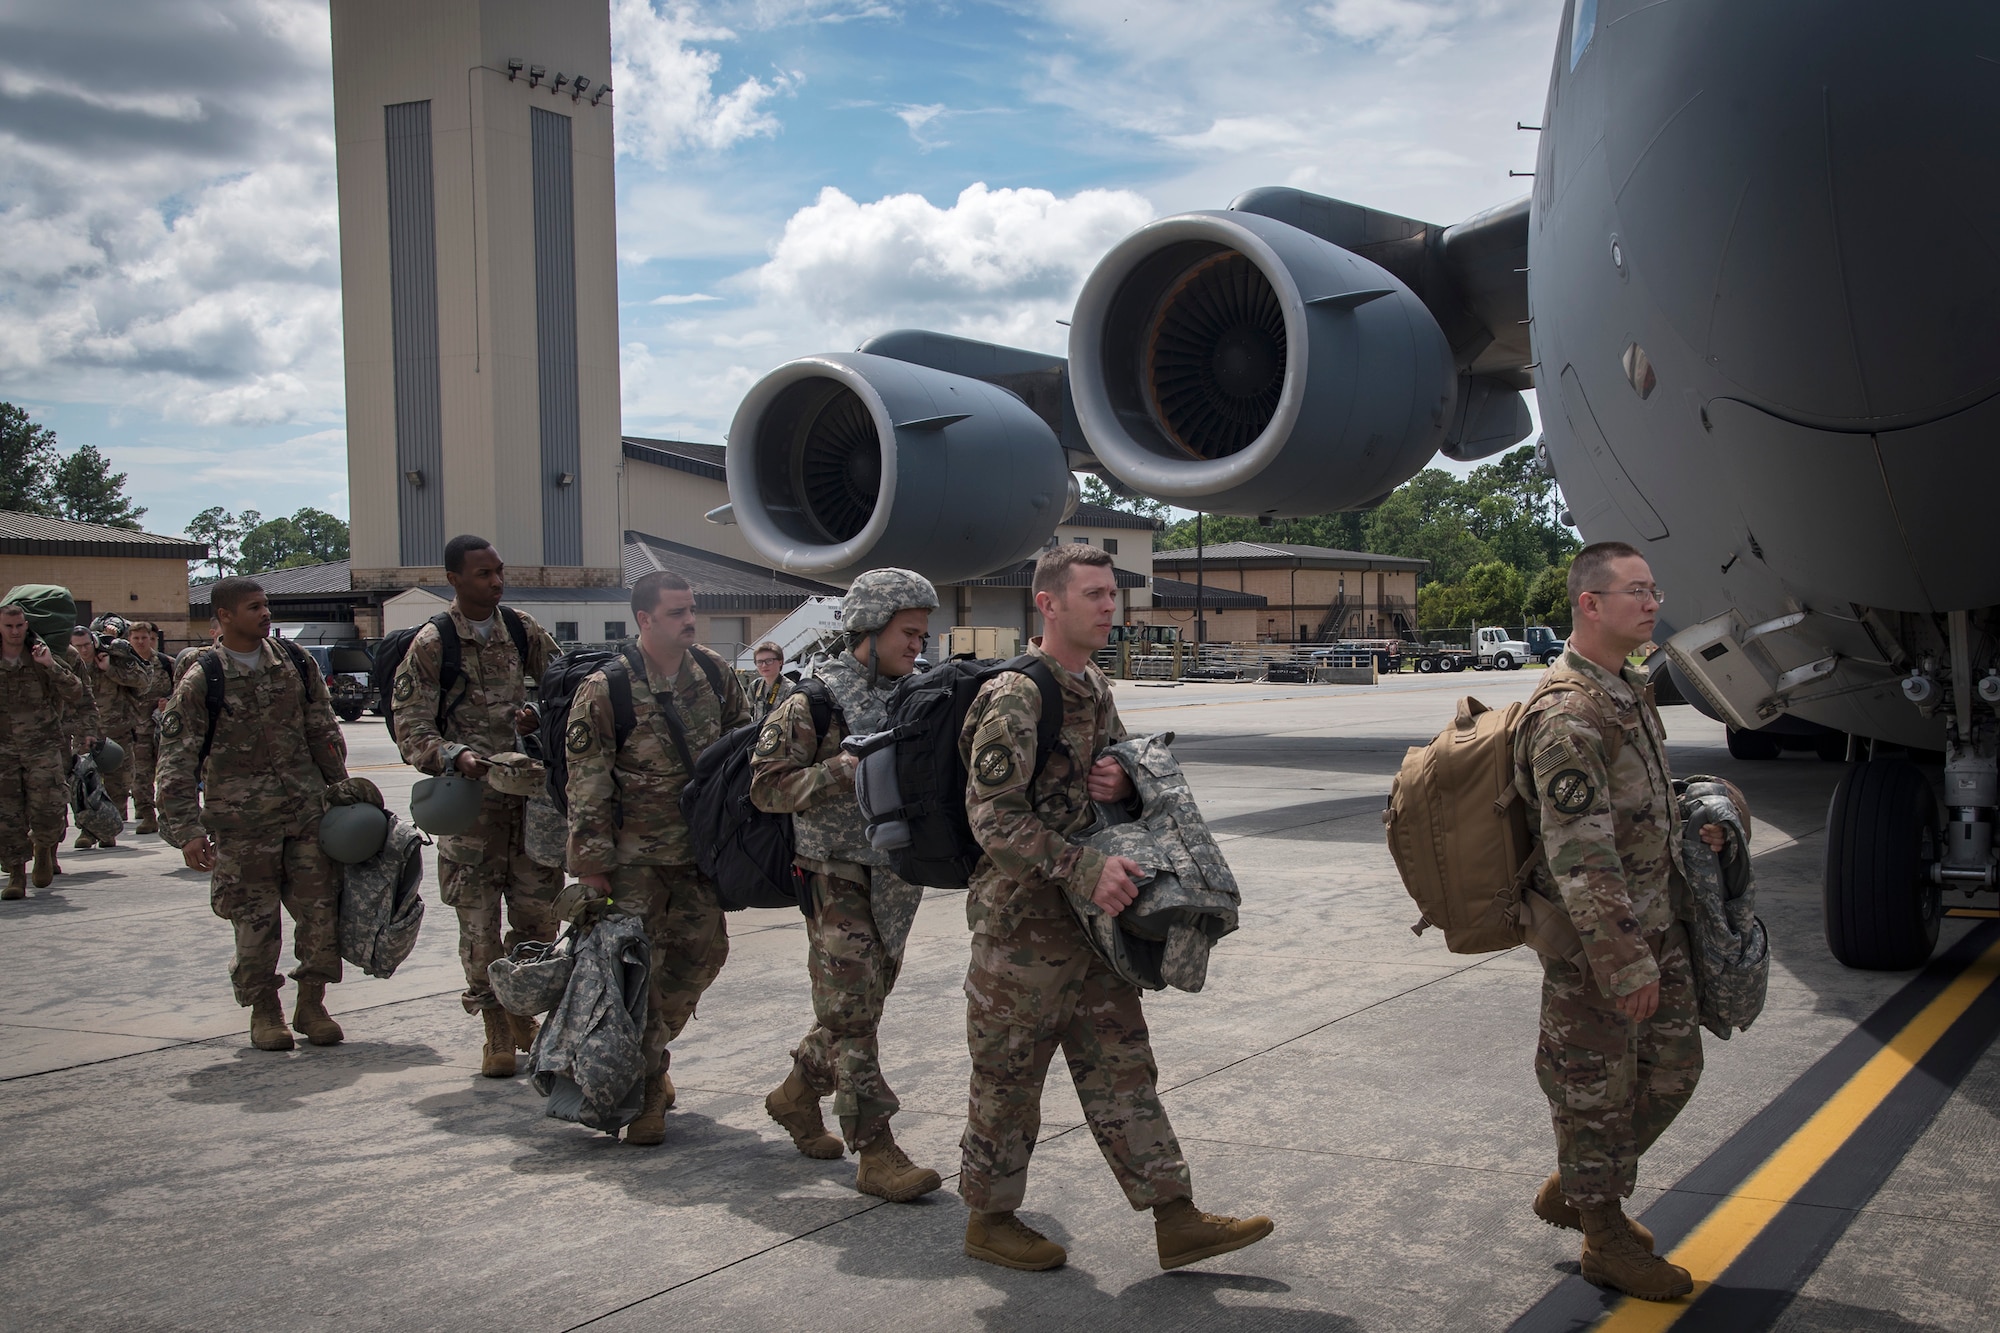 Moody Airmen prepare to board a C-17 Globemaster III prior to deploying, July 5, 2018, at Moody Air Force Base, Ga. Airmen from the 75th Fighter Squadron (FS) and supporting units recently deployed to an undisclosed location in support of Operation Spartan Shield. The 75th FS will undertake close air support missions with the A-10C Thunderbolt II while deployed. (U.S. Air Force photo by Airman 1st Class Eugene Oliver)